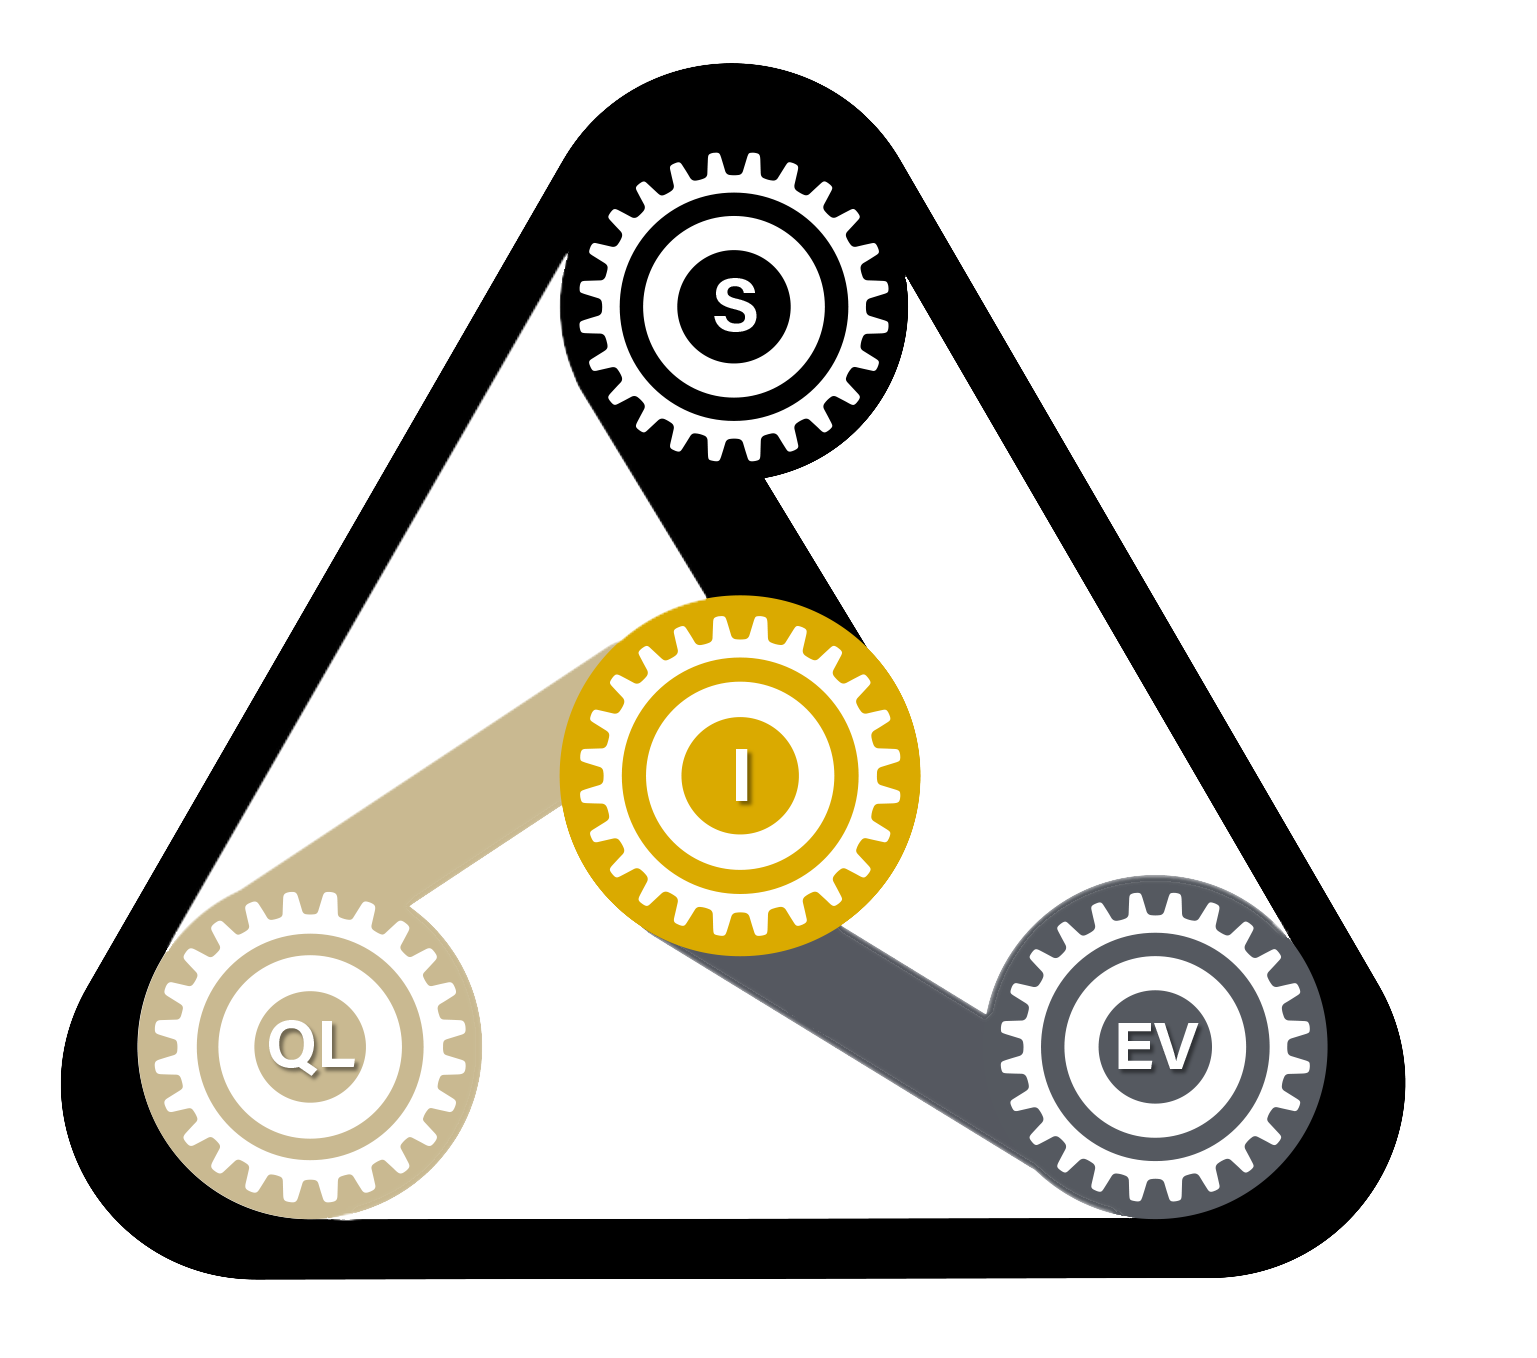 Triangle made of three gears: safety, economic vitality, and quality of life.